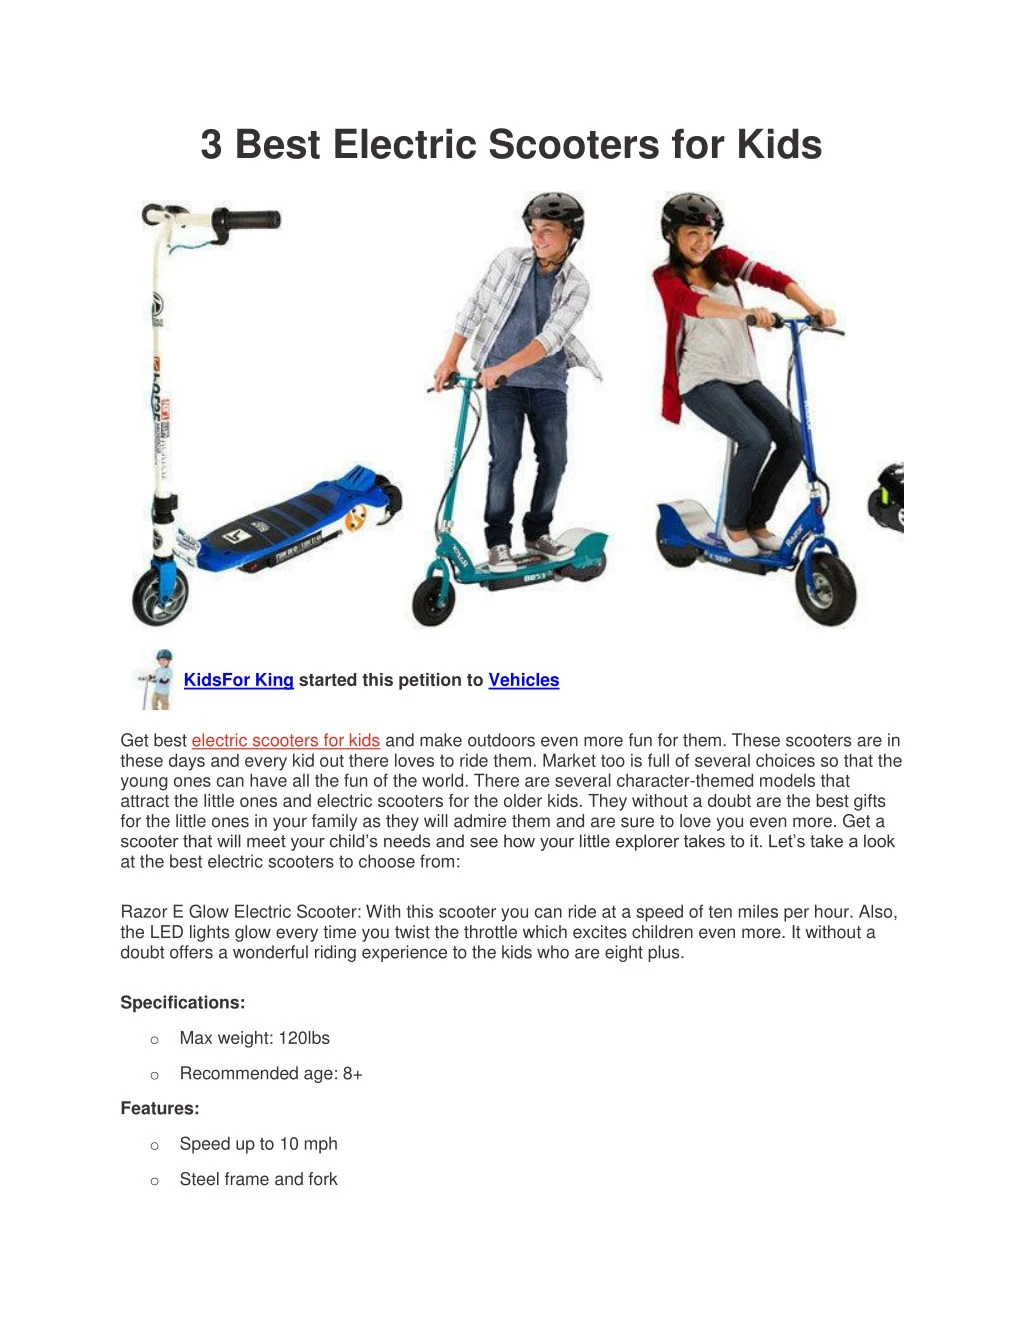 3 best electric scooters for kids